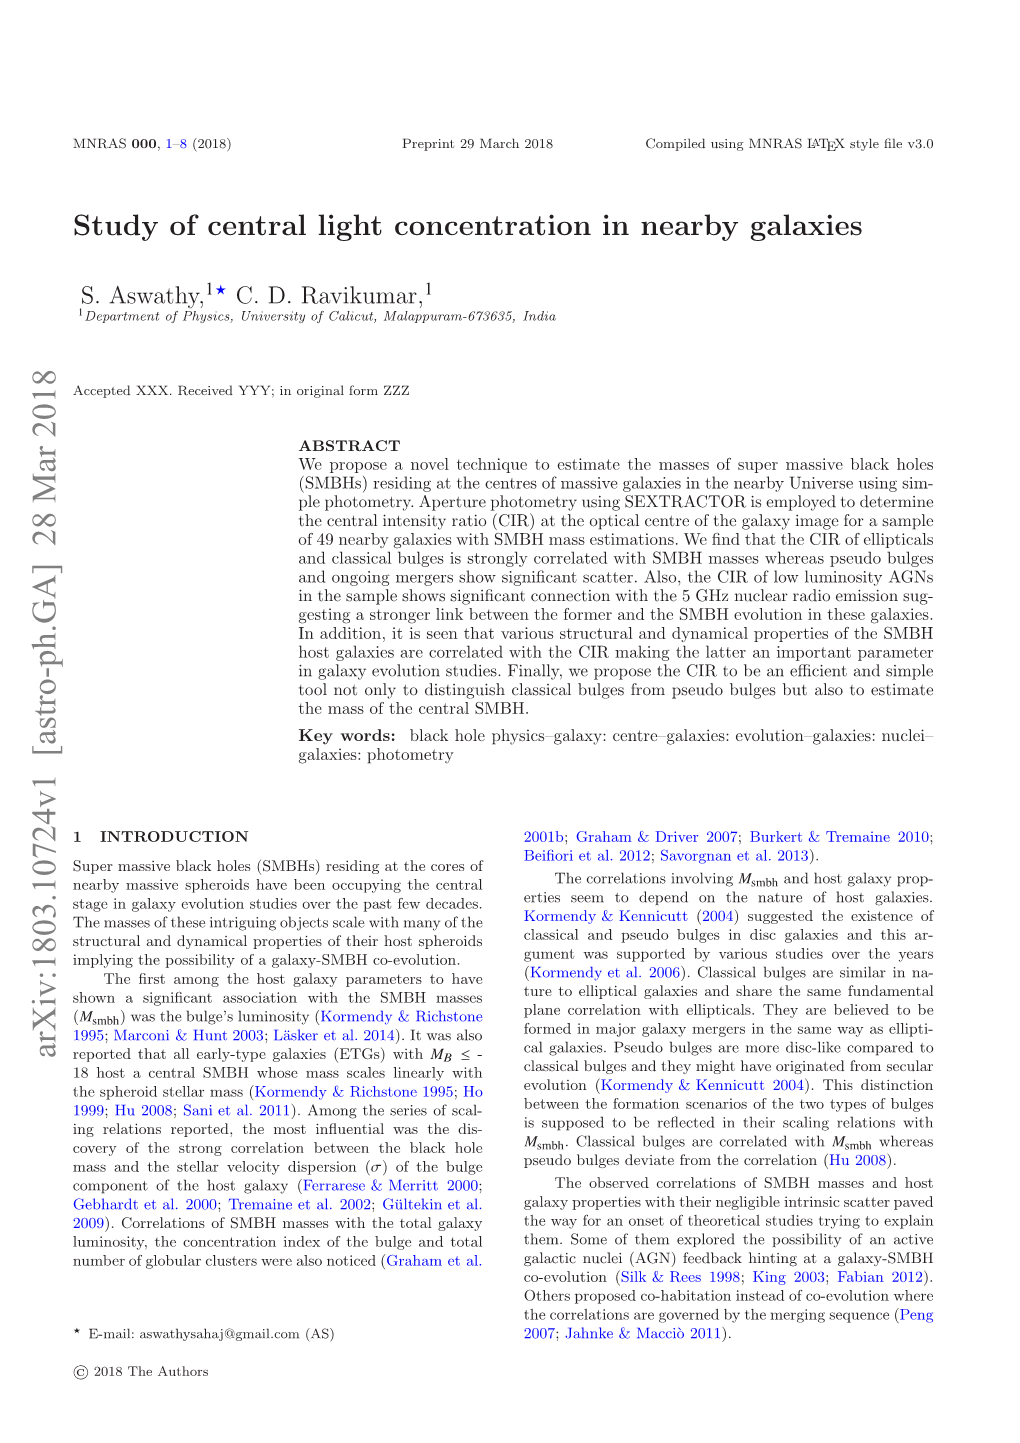 Study of Central Light Concentration in Nearby Galaxies